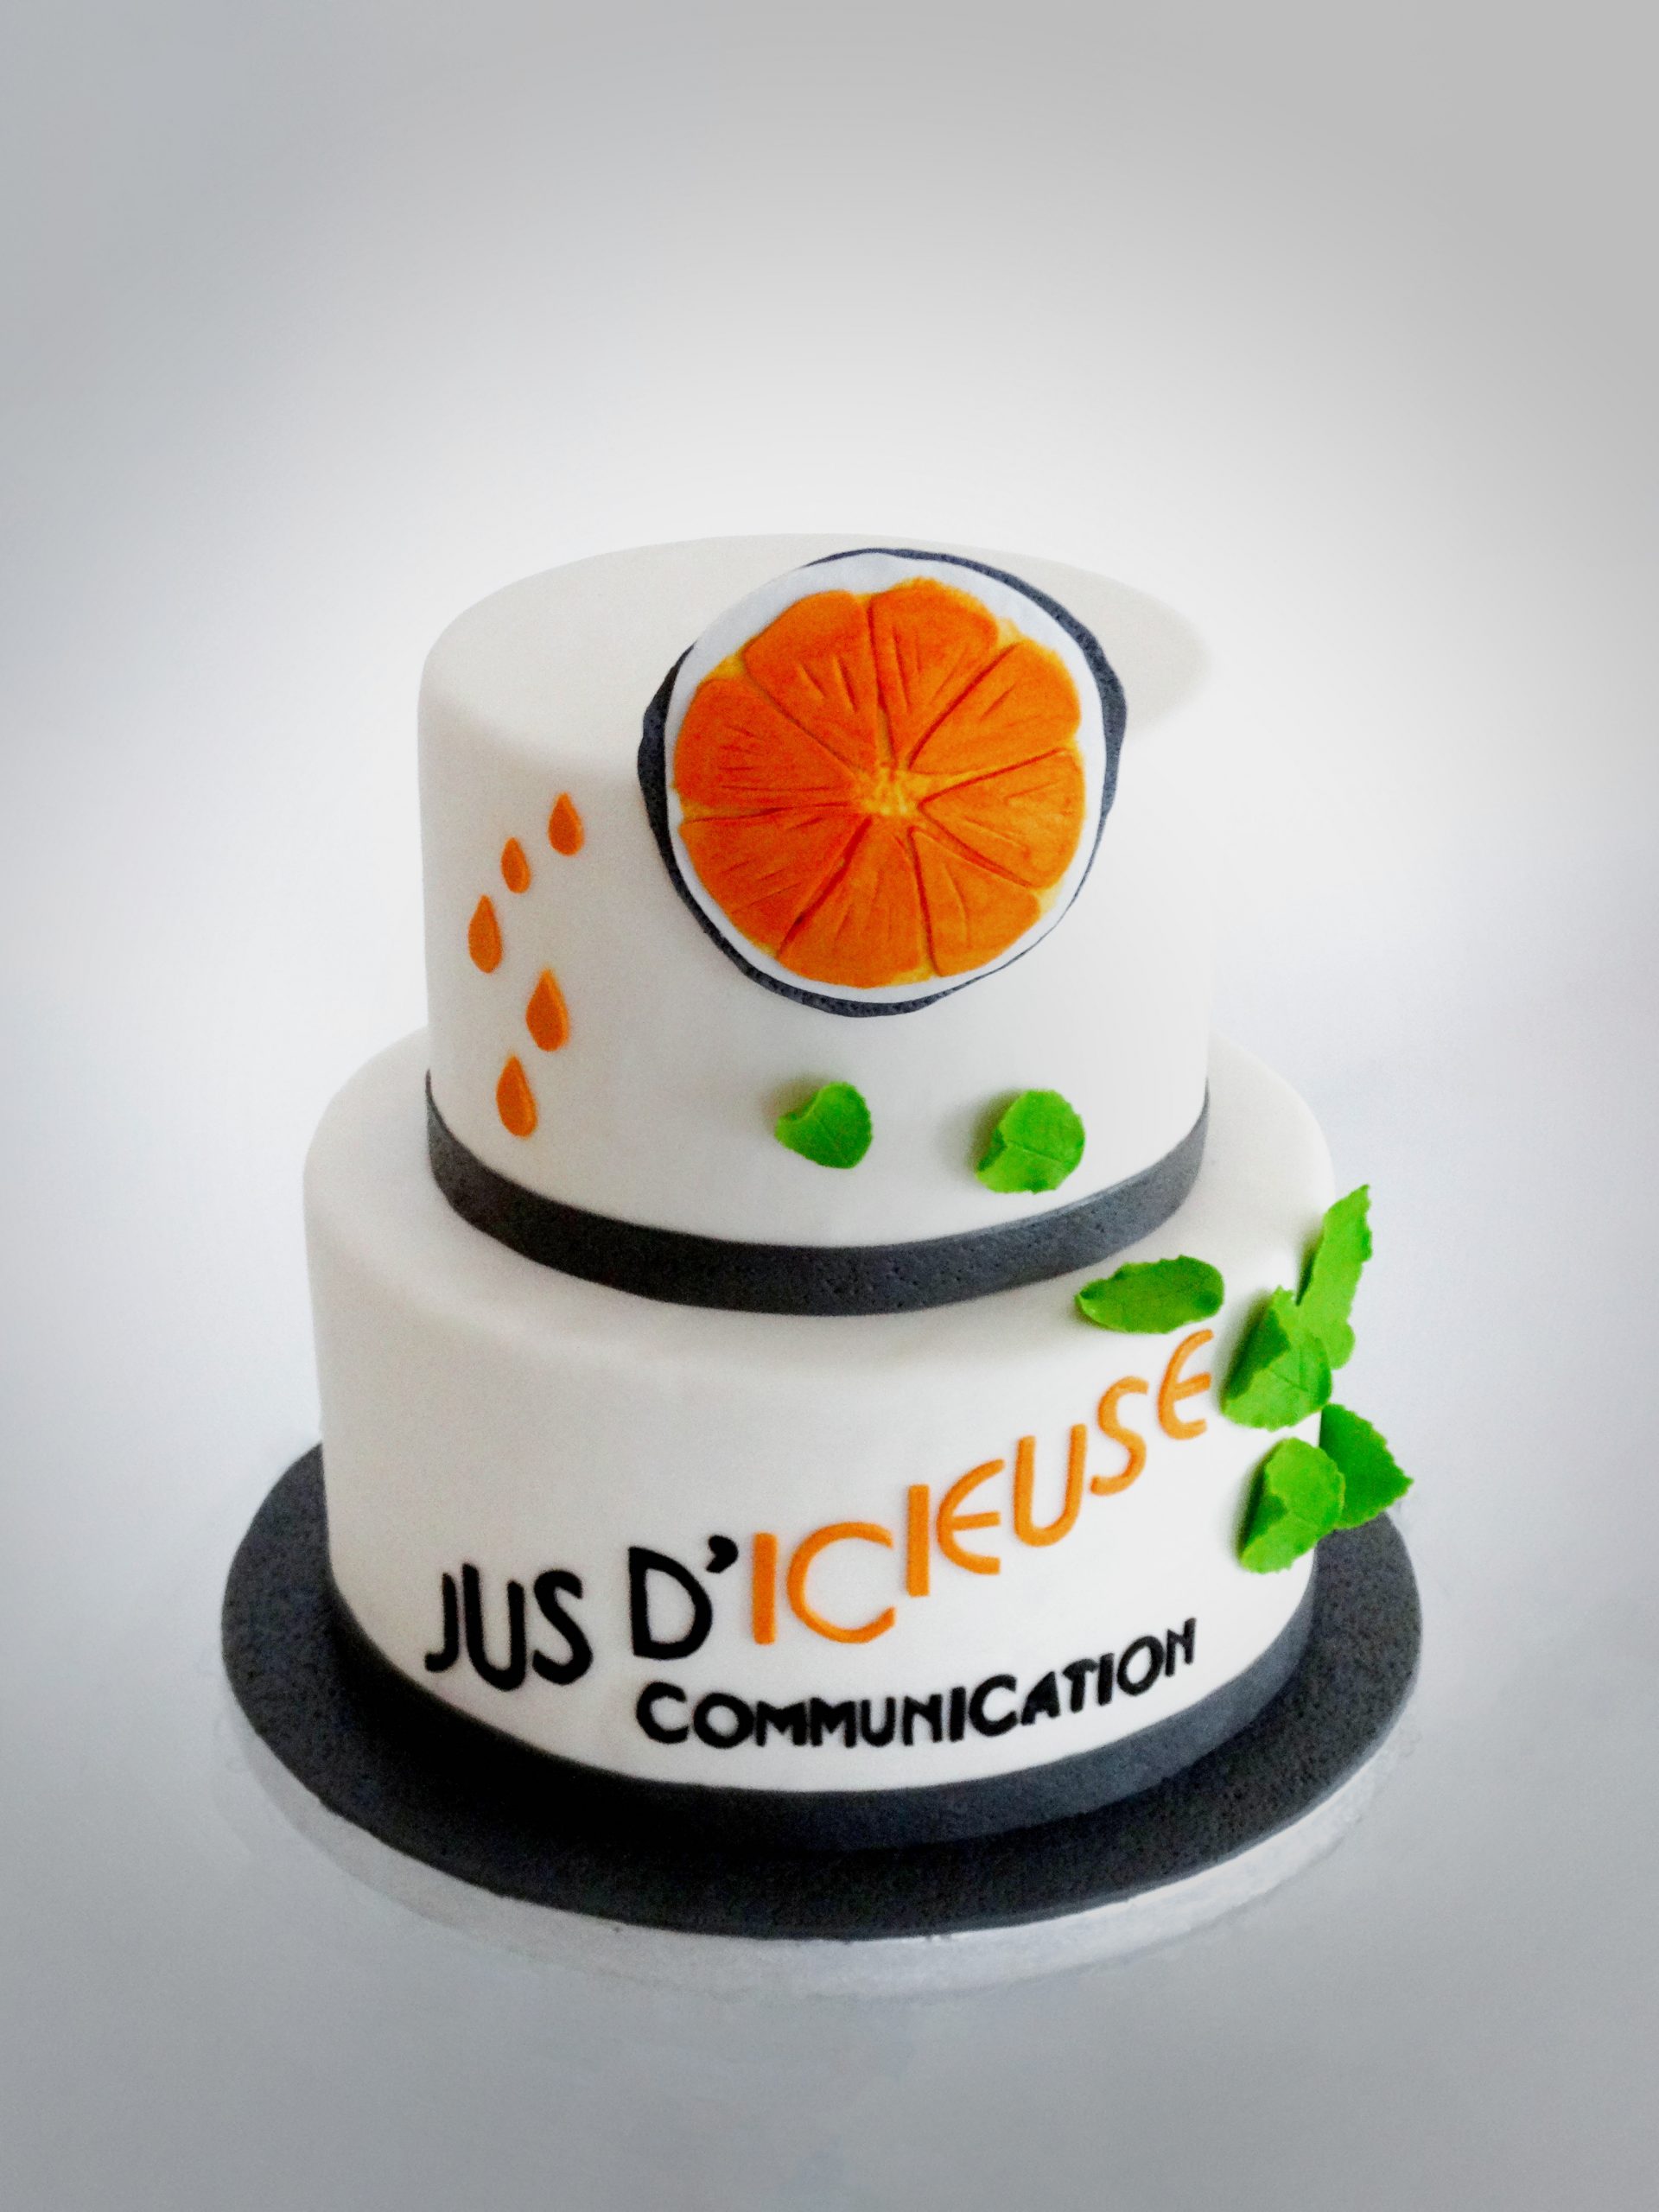 Inauguration<br>Jus d'Icieuse